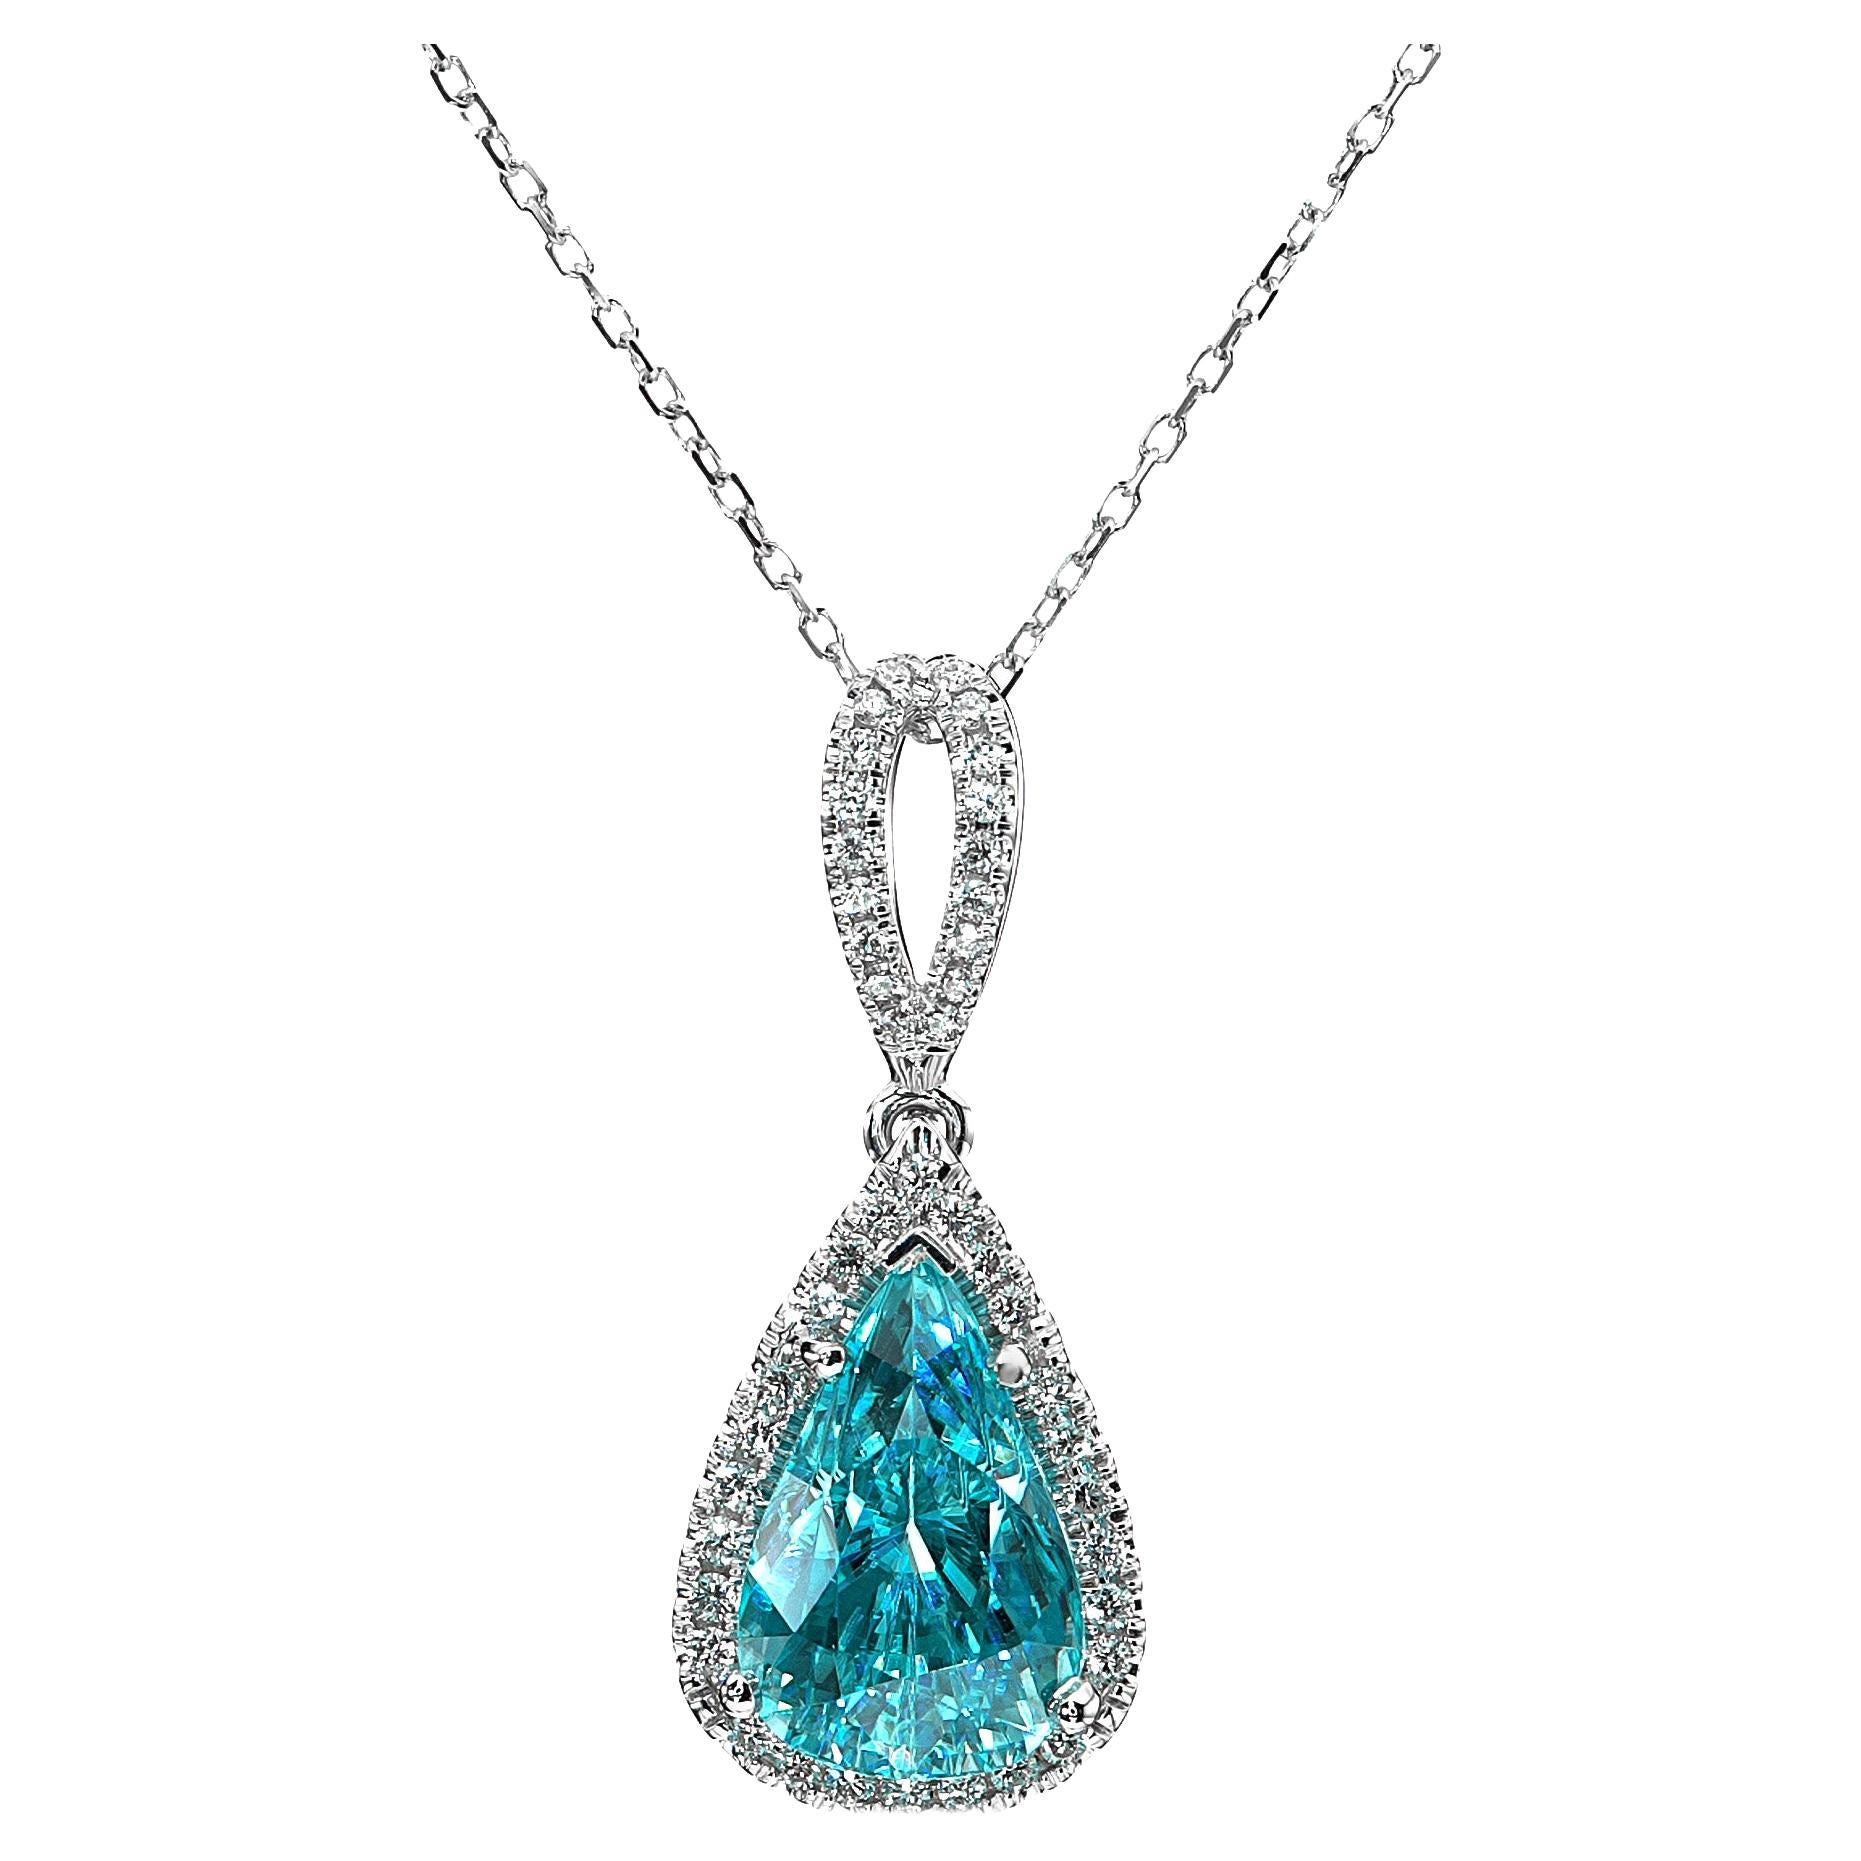 6.90 Carats Blue Zircon Pendant with 0.22 carats Diamonds and 14KWG Chain